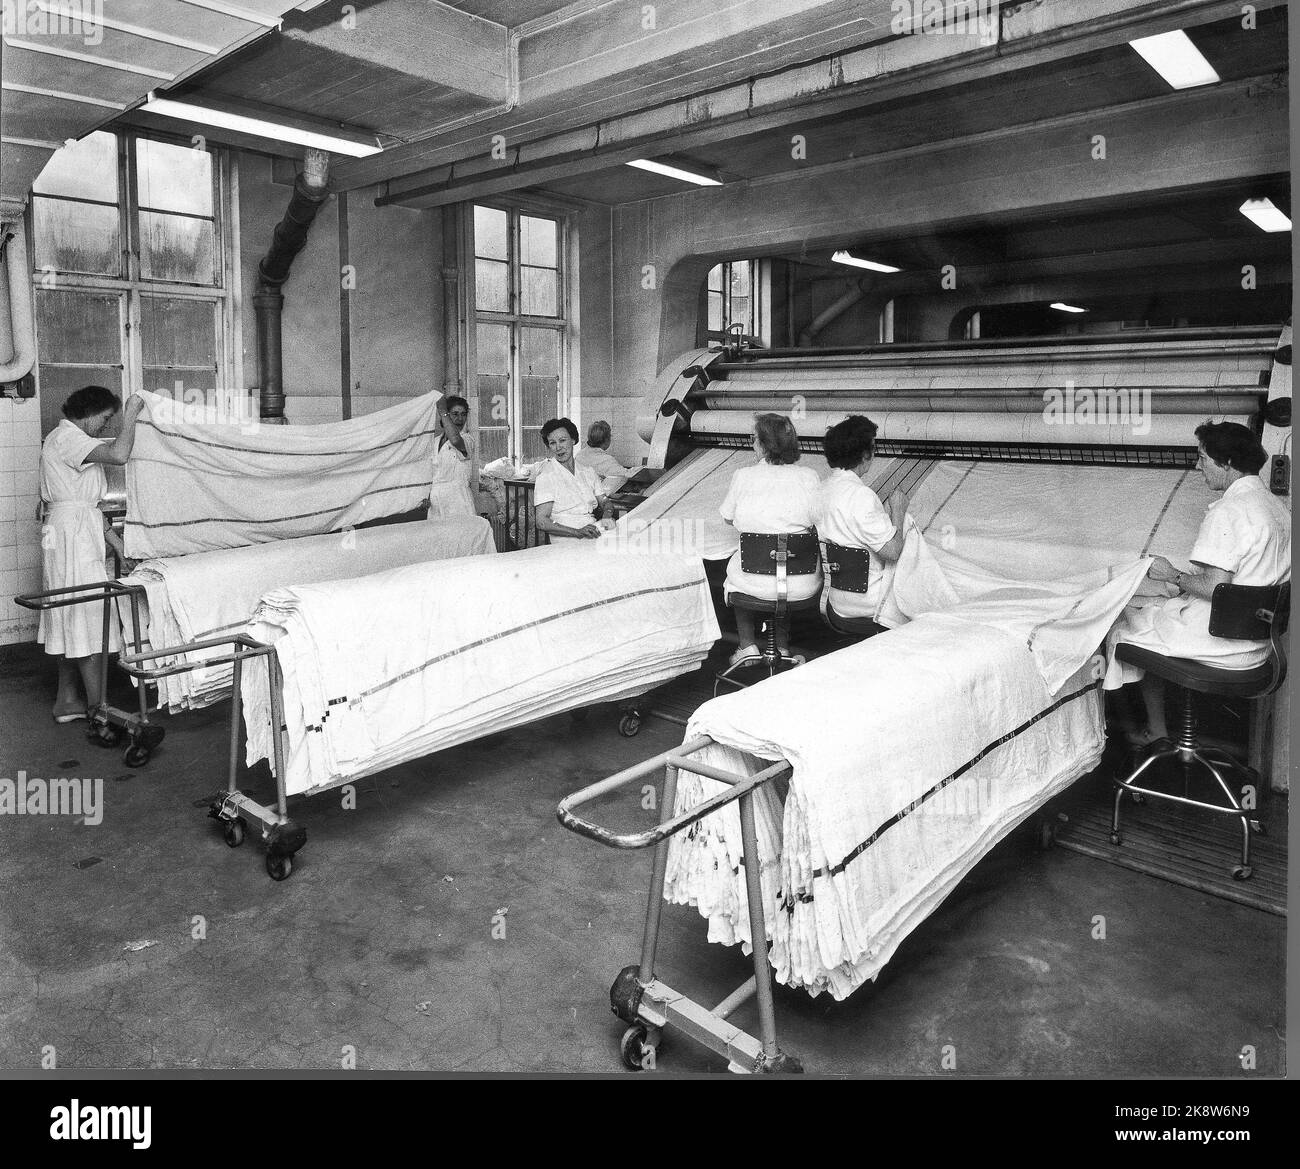 Oslo 19600106: In 1960, NSB had 3212 beds in their sleeping wagons, and they became increasingly popular. Every day, an army of cleaners moved into NSB's area in Lodalen, to wash, clear and change bedding. The bedding is washed at NSB's laundry in Lodalen, which in 1959 handled 1.5 million kilos of clothes only from the sleeping cars. This corresponds to about 300,000 bed shifts in one year. Around Christmas there are often 3000 sheets per day! Photo: Ivar Aaserud / Current / NTB Stock Photo